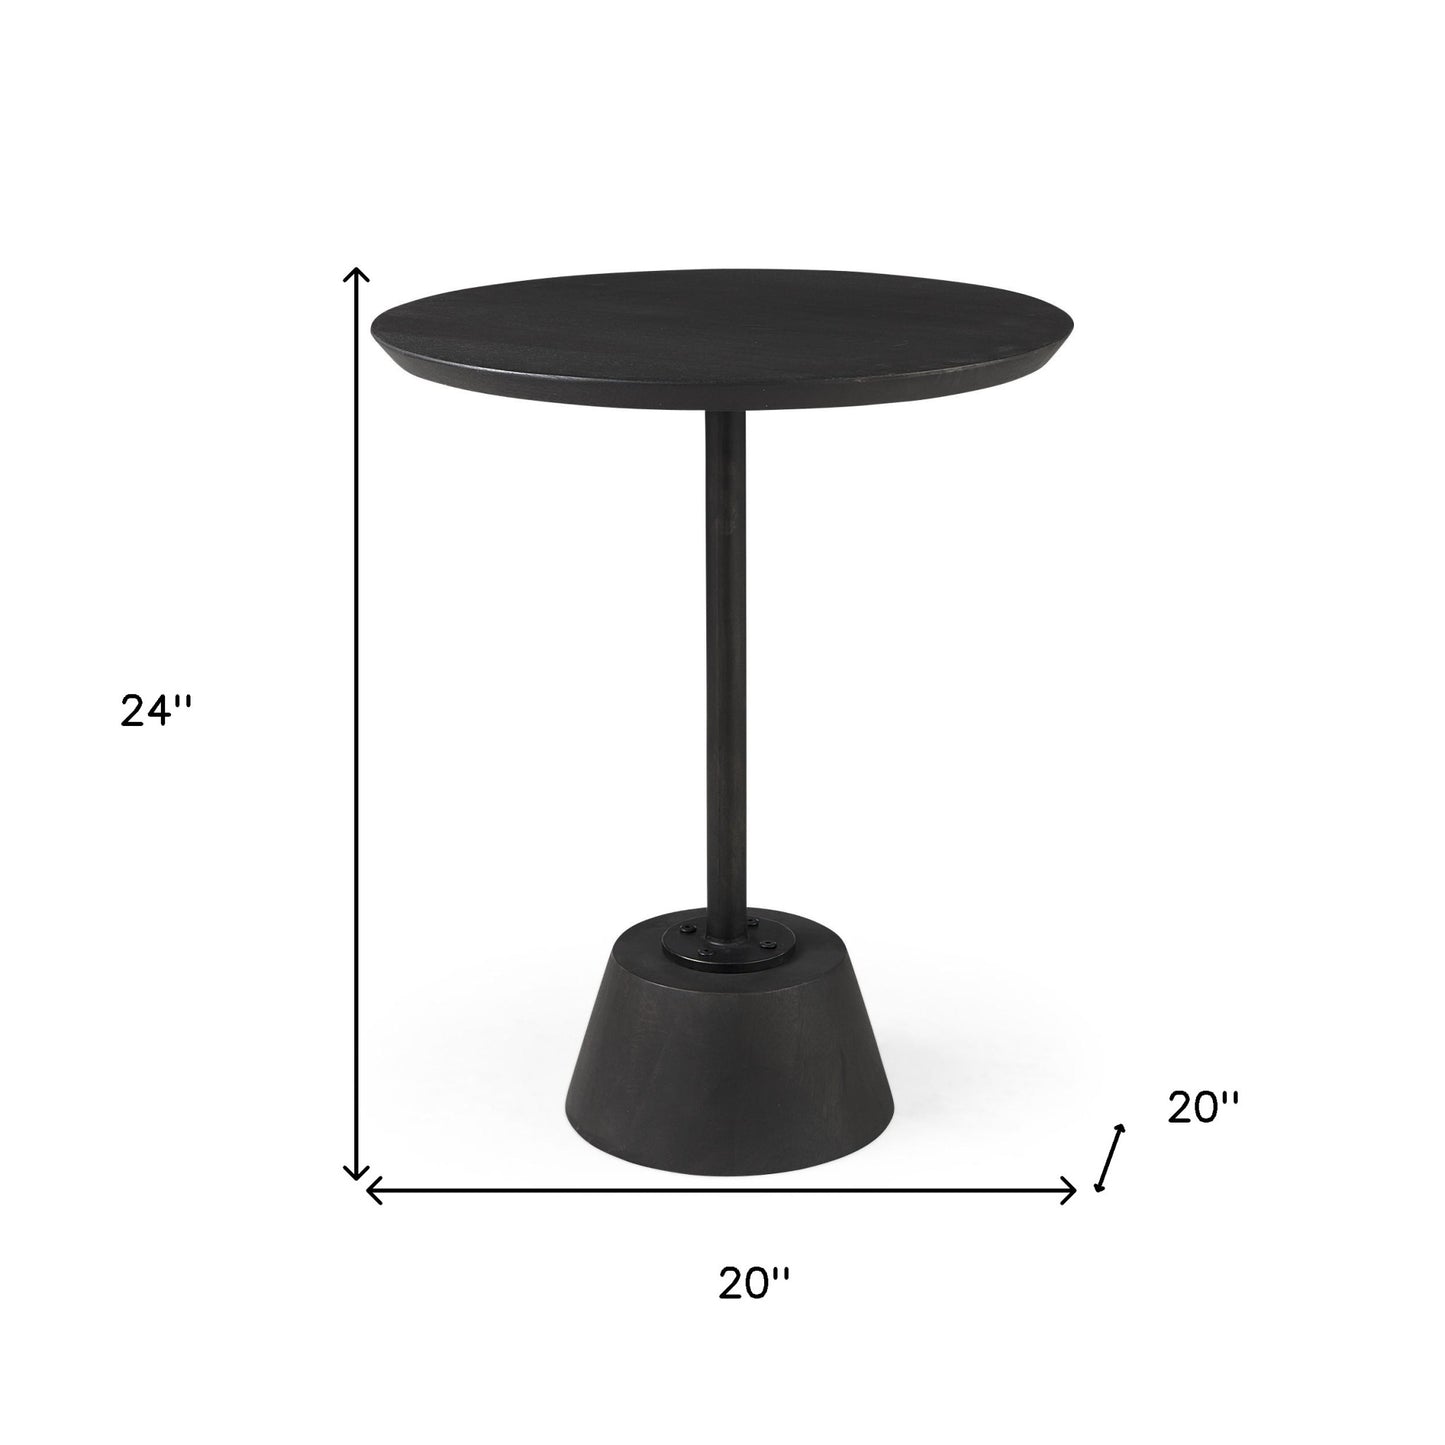 Dark Stain Pedestal Table With Black Detailing